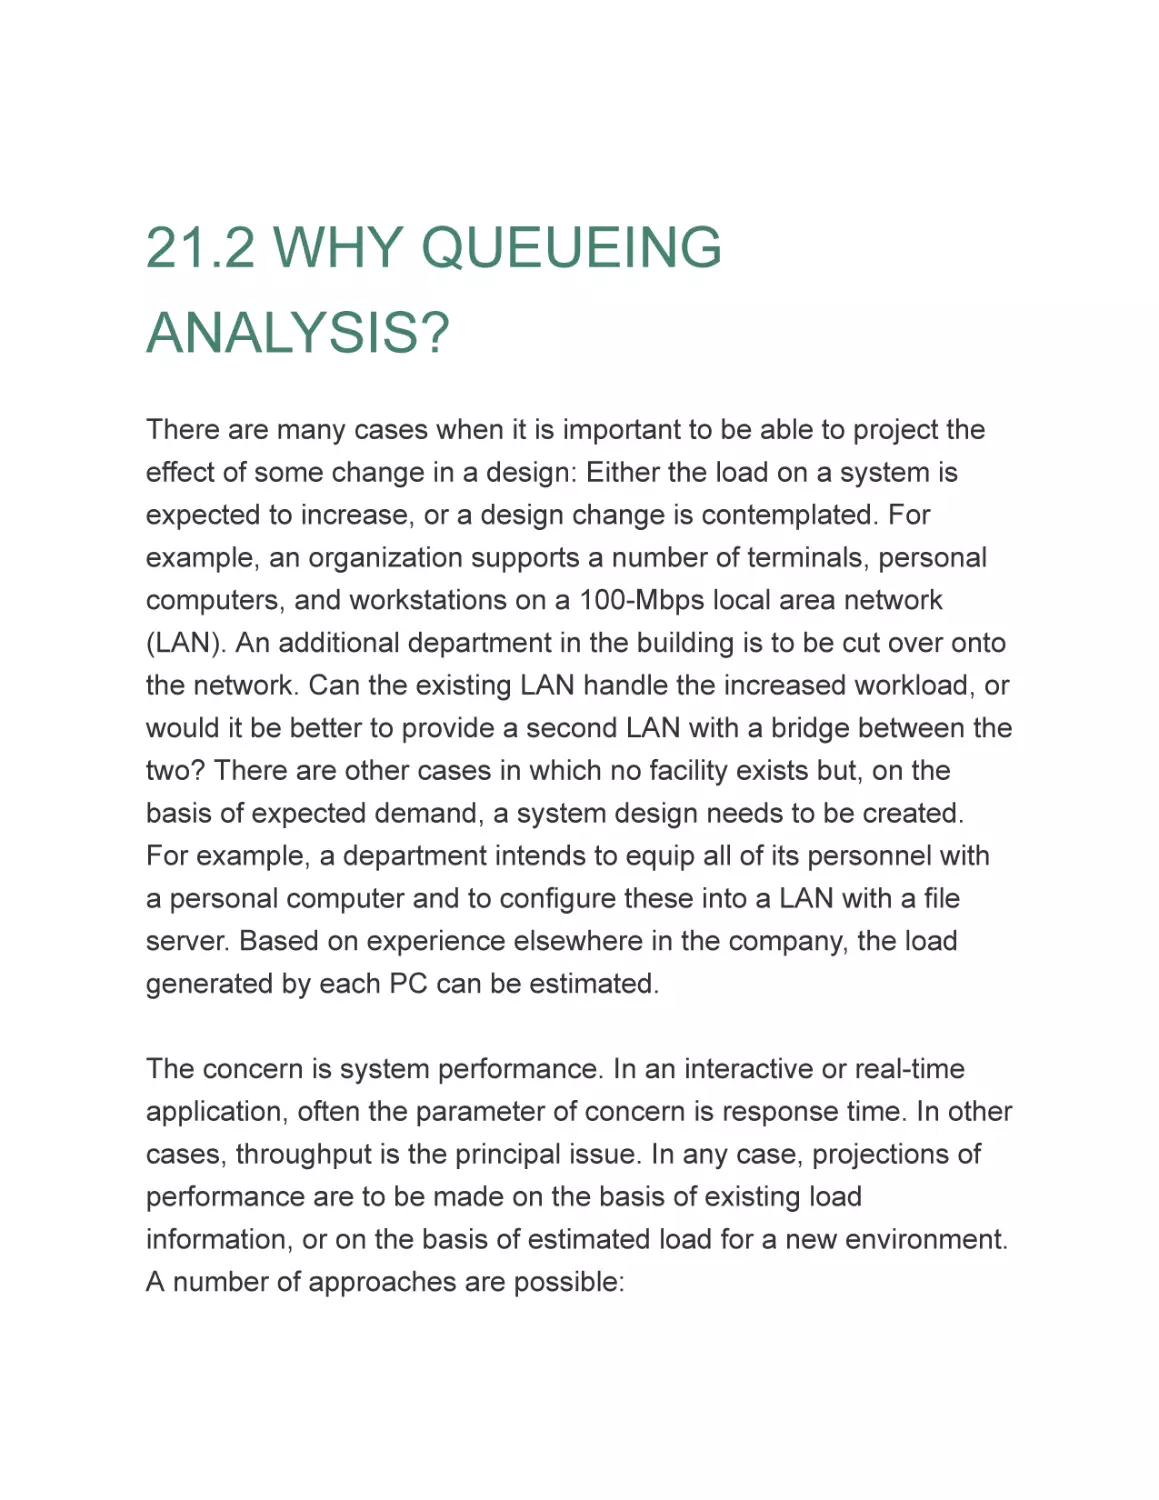 21.2 WHY QUEUEING ANALYSIS?